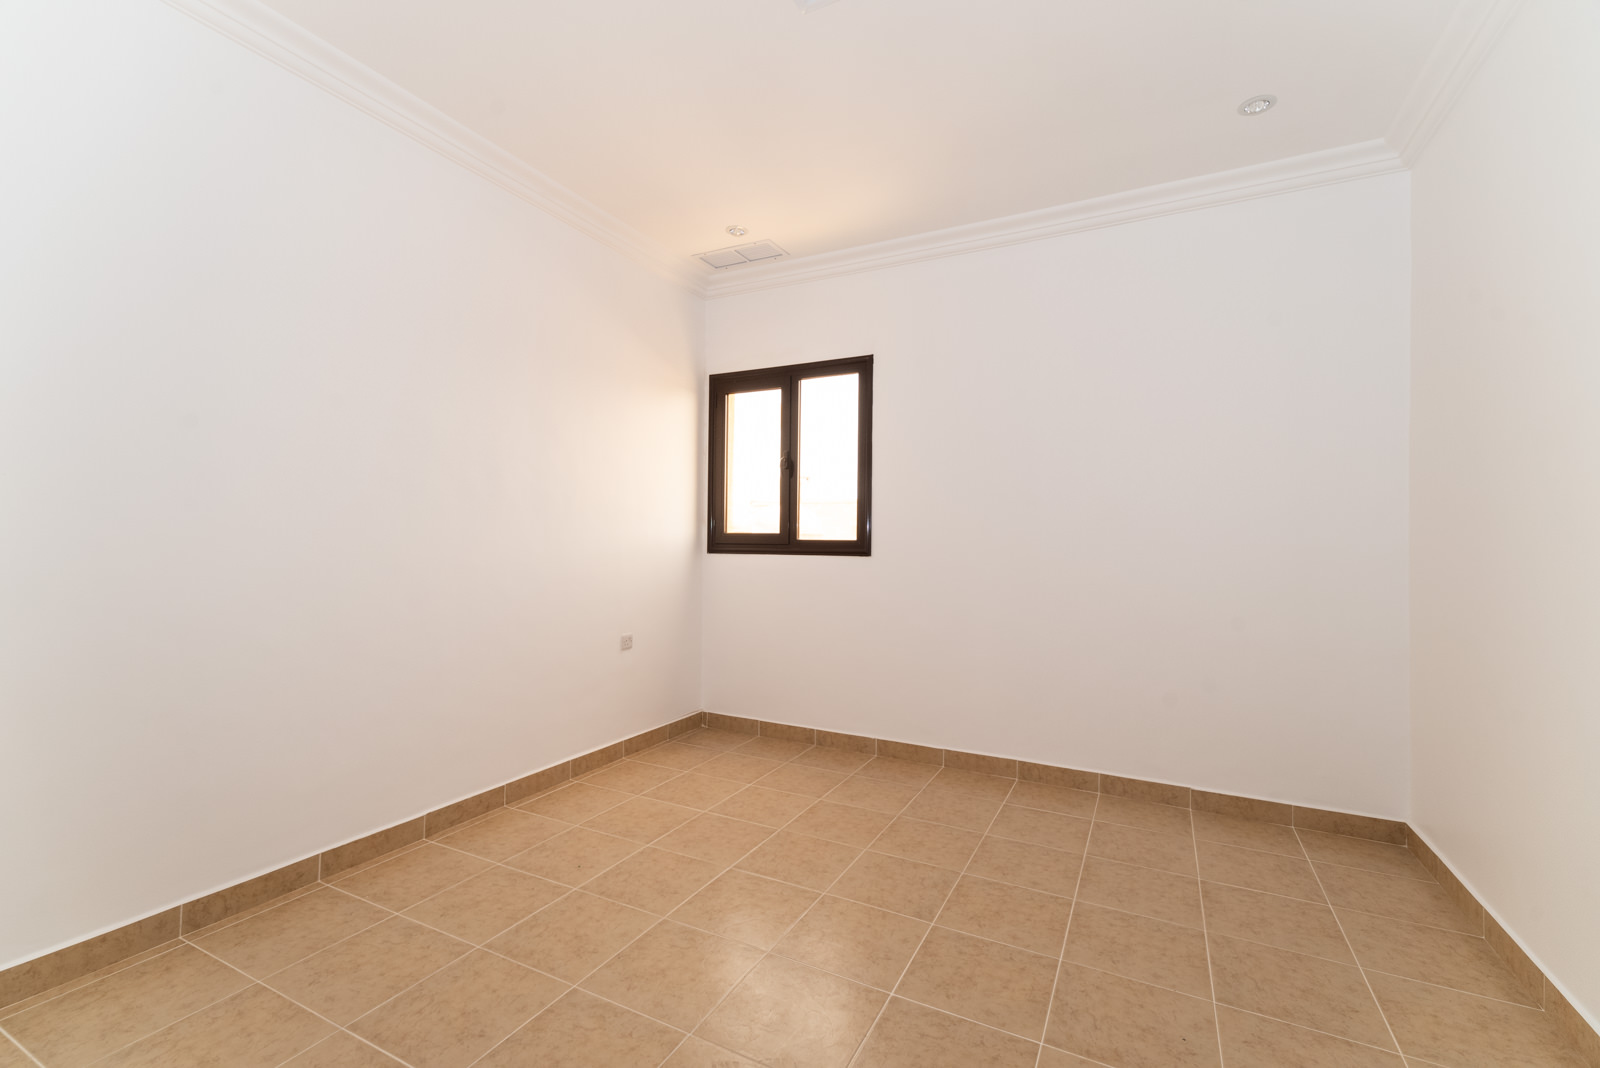 Salwa – unfurnished, three bedroom apartment w/very large roof terrace